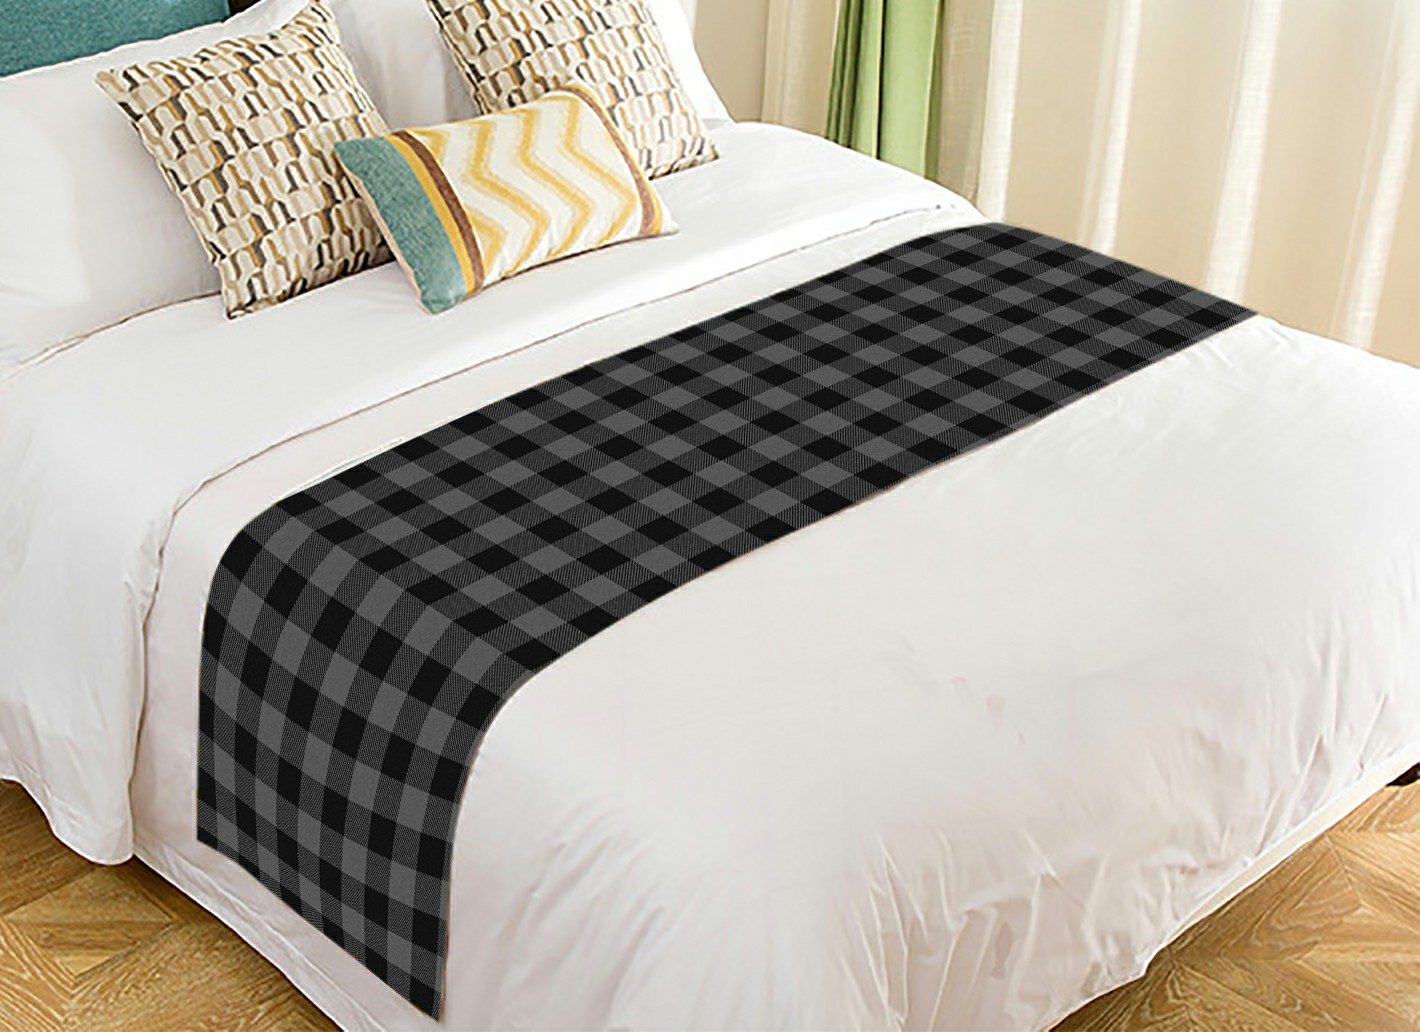 ABPHQTO White Buffalo Plaid Bed Runner Bedding Scarf Bed Decoration 20x95 inch